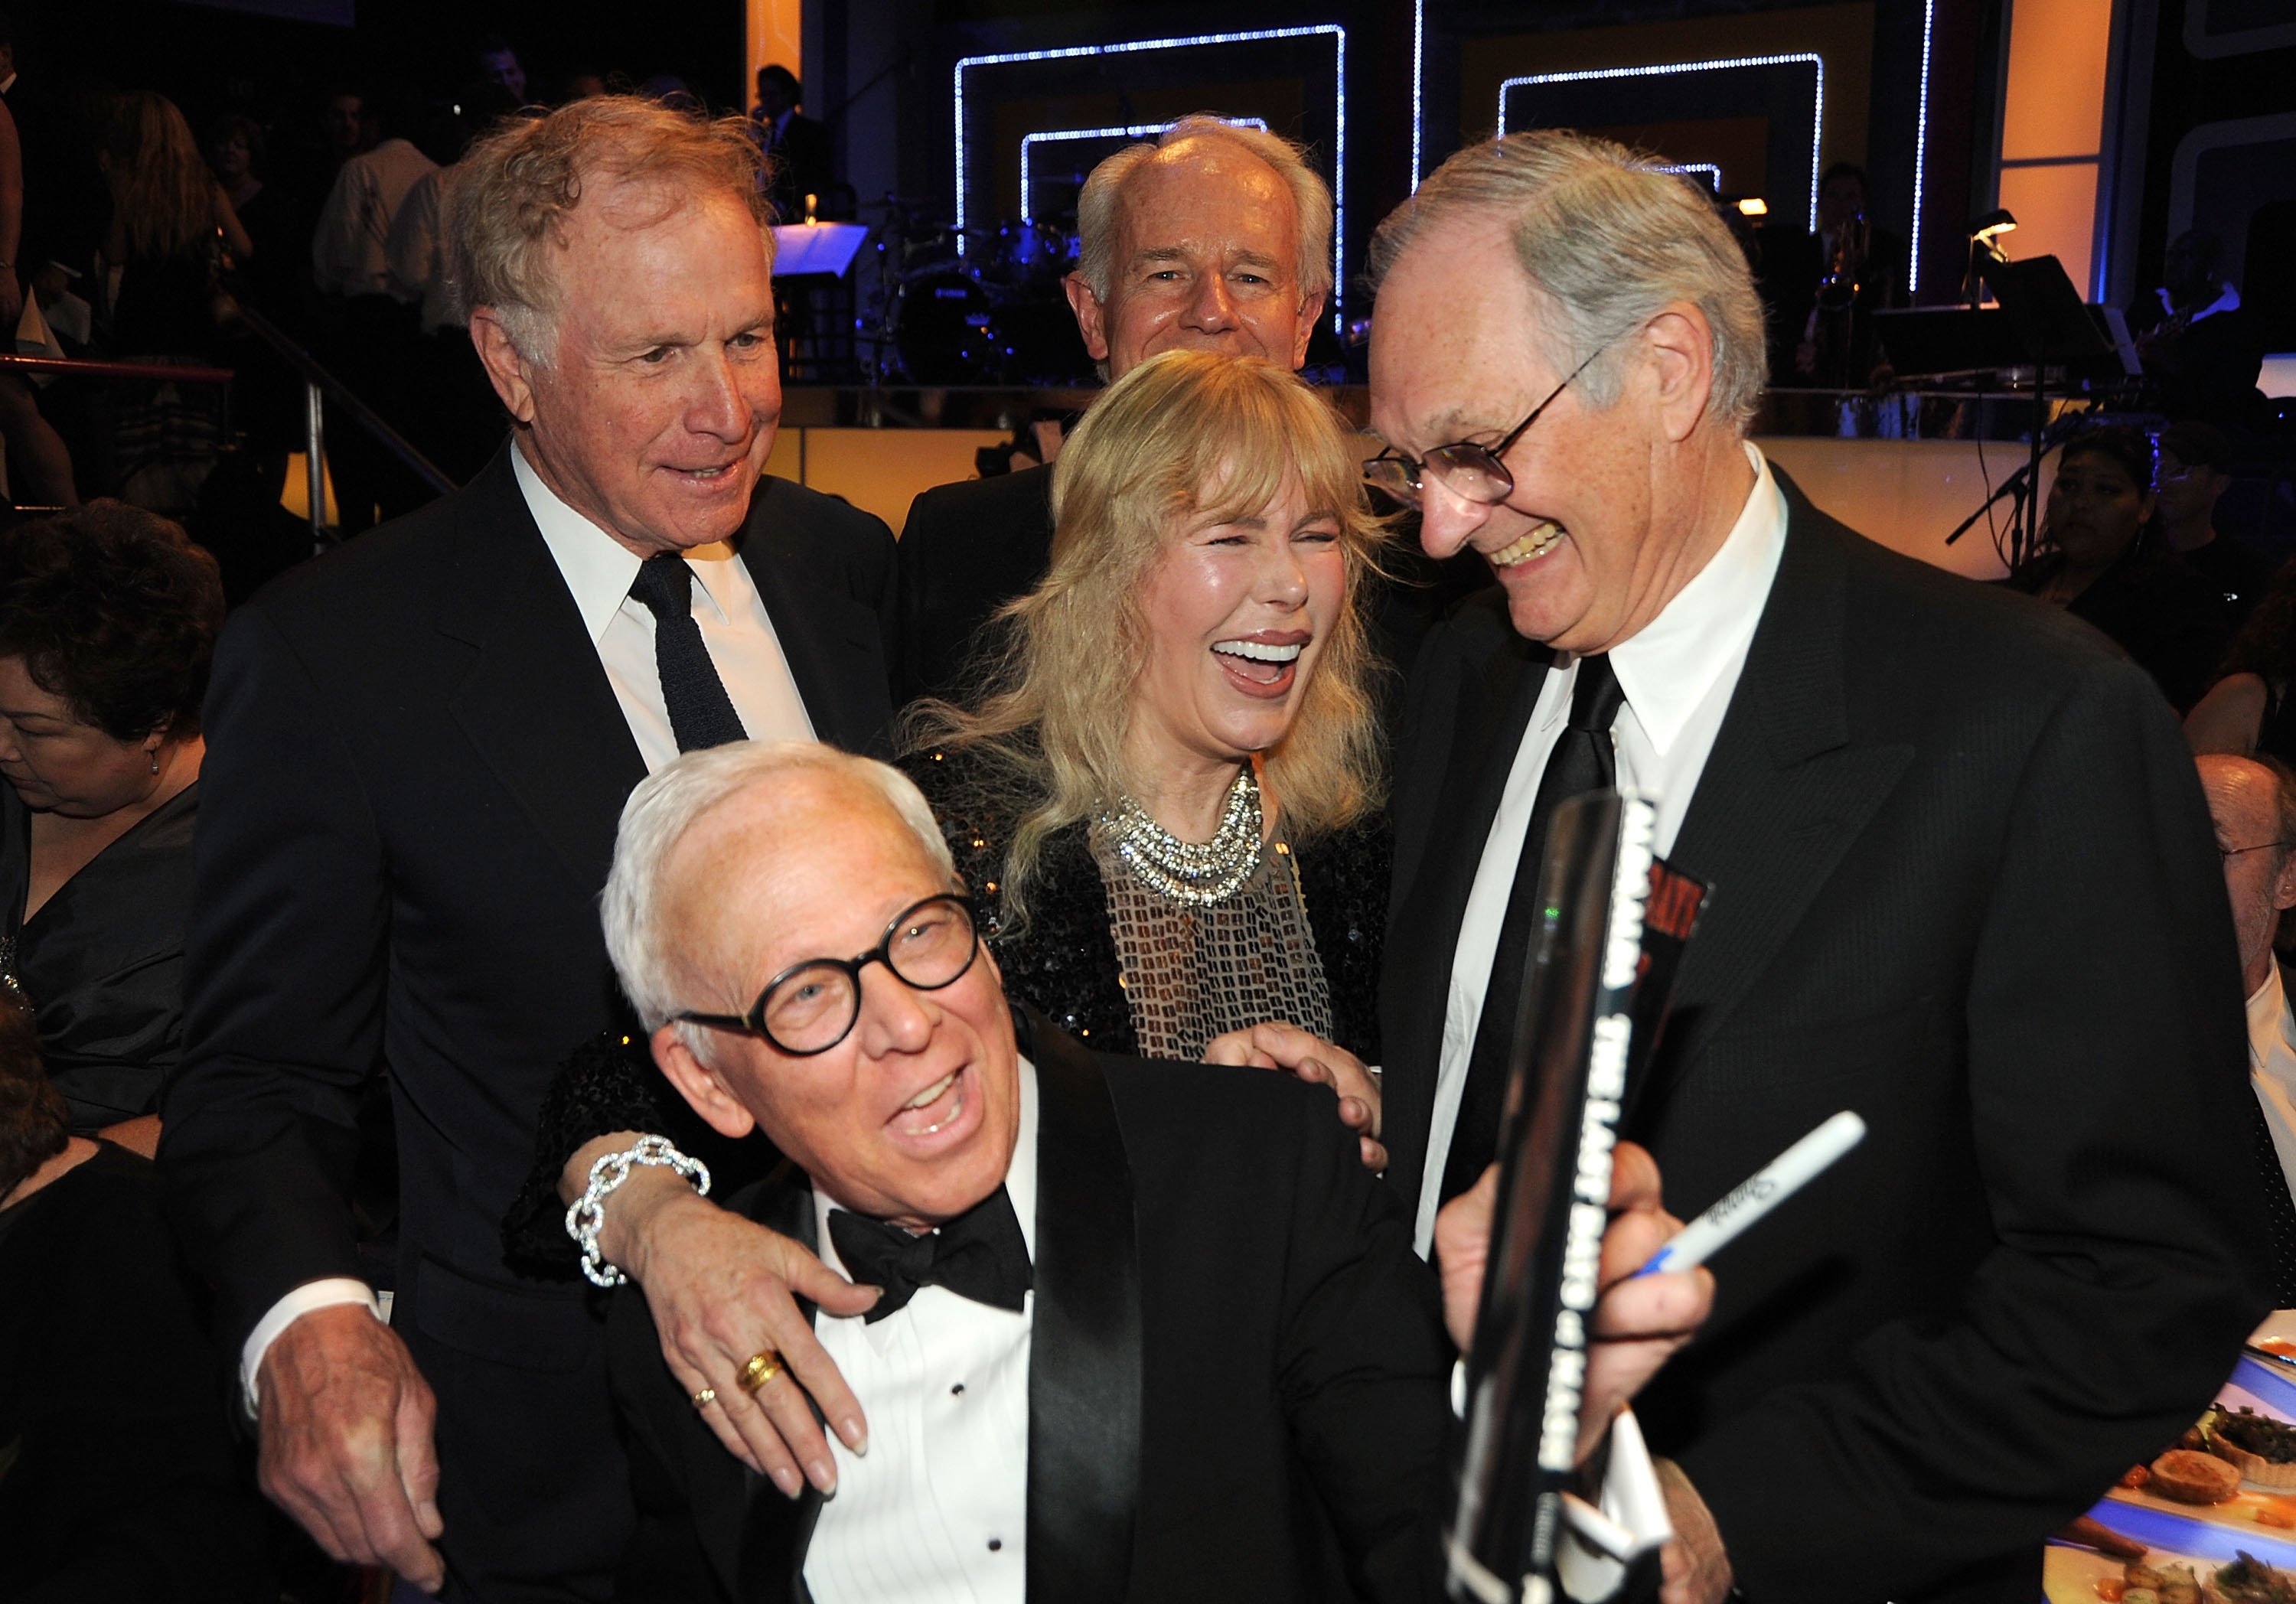 Wayne Rogers, Mike Farrell, Alan Alda, Loretta Swit and William Christoper, the cast of MASH, at the Annual TV Land Awards held on April 19, 2009 in California. | Source: Getty Images